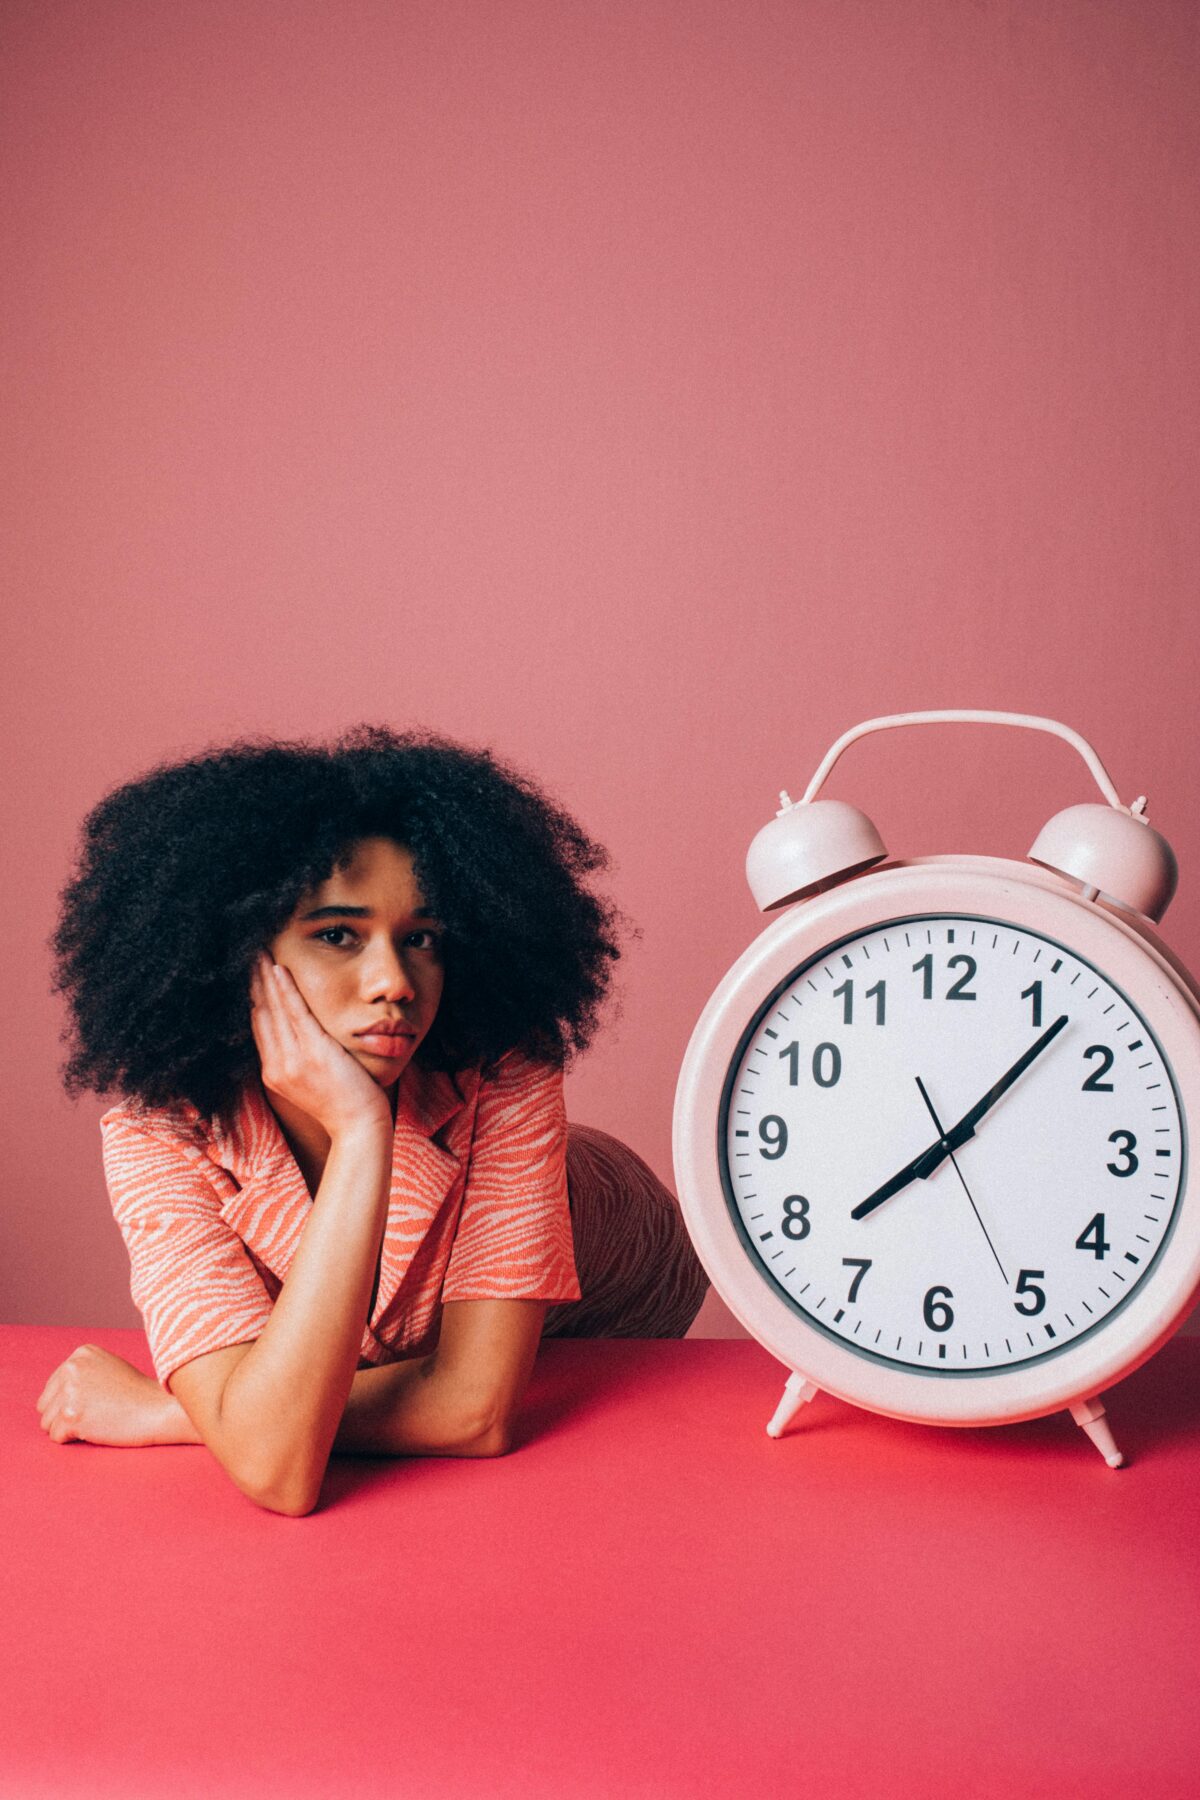 A young woman lying down and propping her head up, next to a giant pink alarm clock.